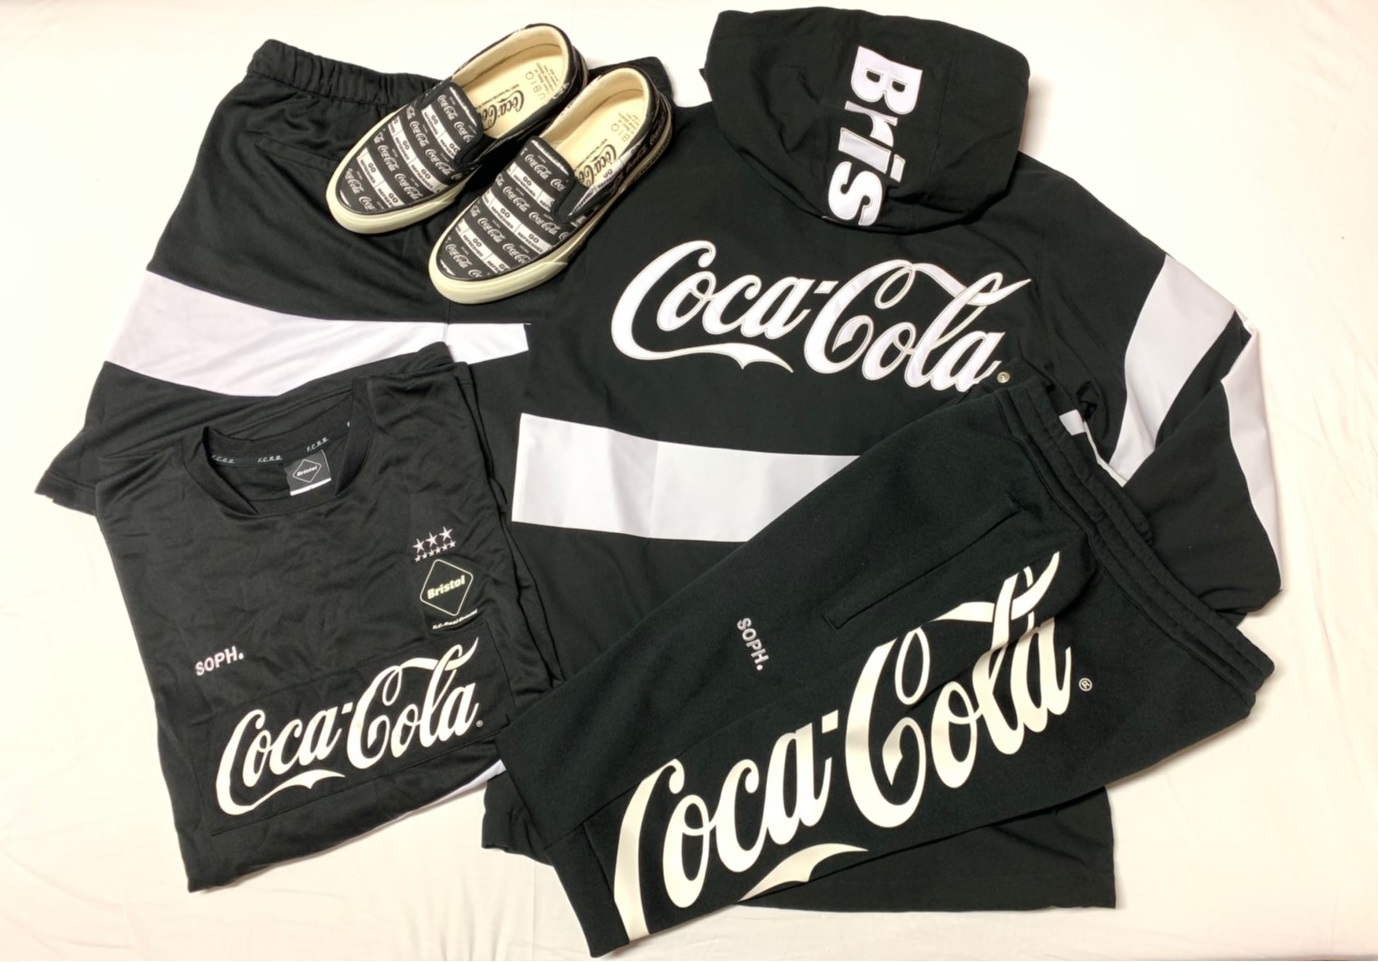 F.C.R.B. 19 S/S Delivery 2 & FCRB x Coca-Cola - Life's a bitch and 